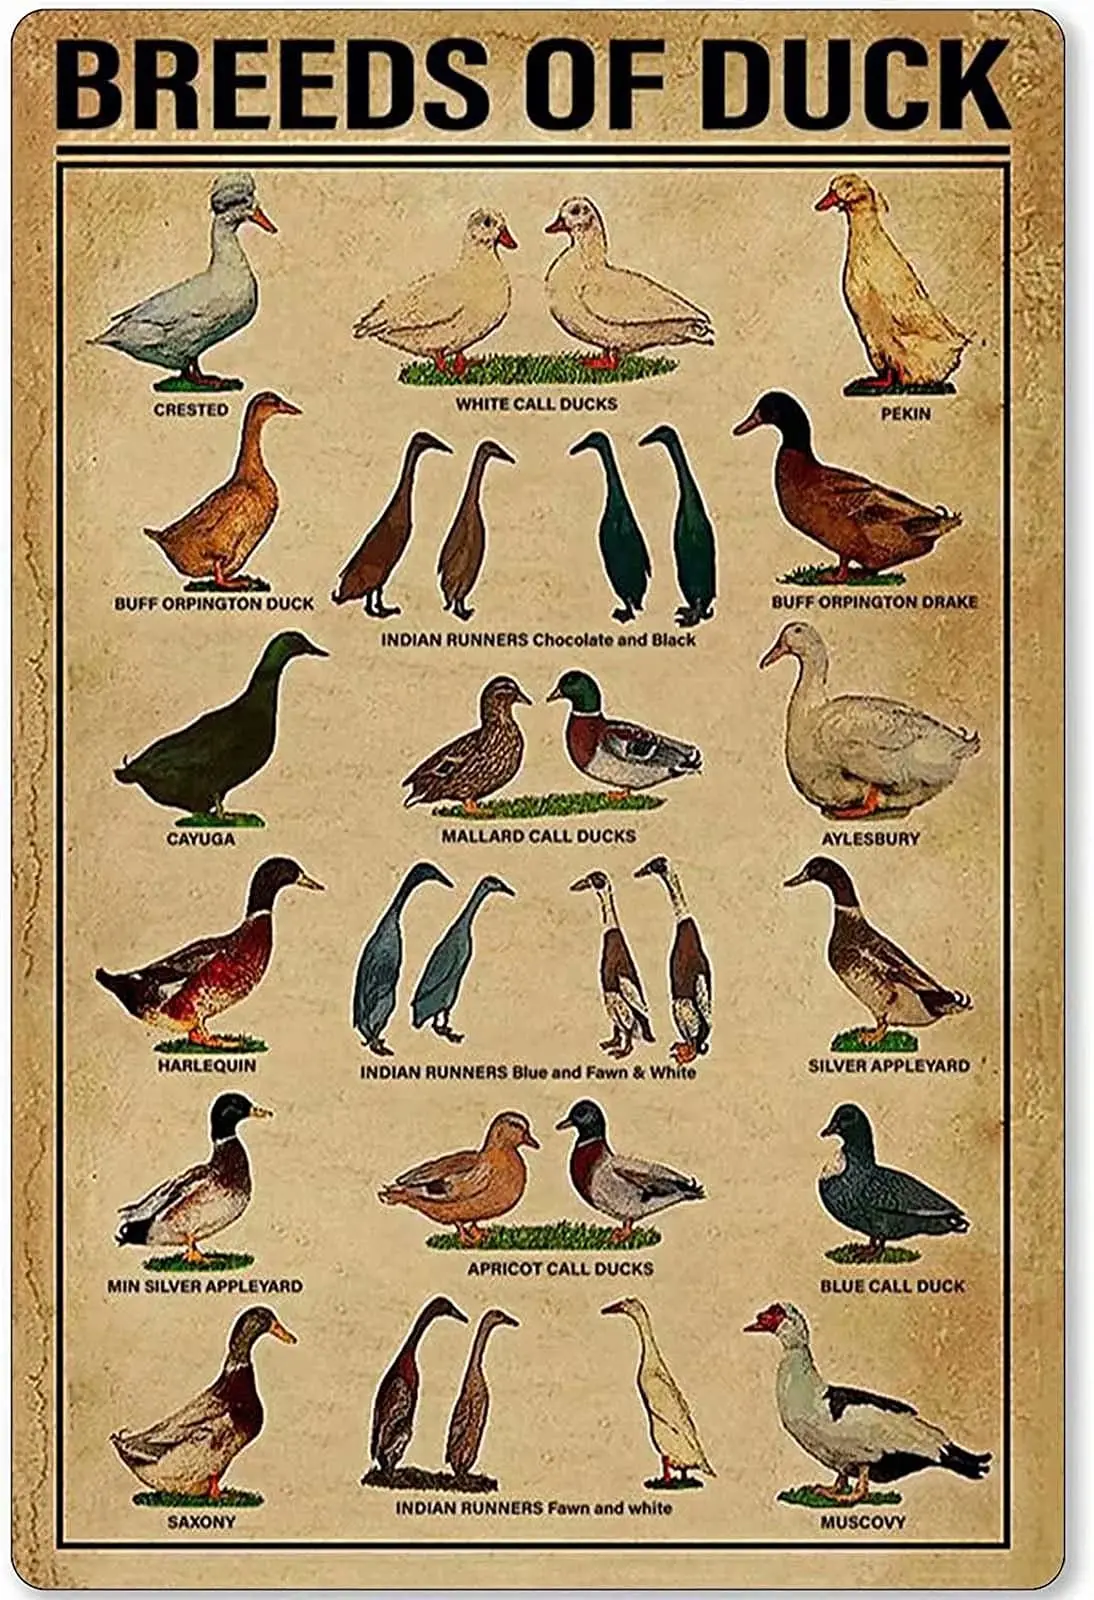 

Retro Metal Tin Sign Wall Decor - Breeds of Duck - Funny Vintage Tin Sign Wall Plaque Poster for Cafe Bar Restaurant Supermarket